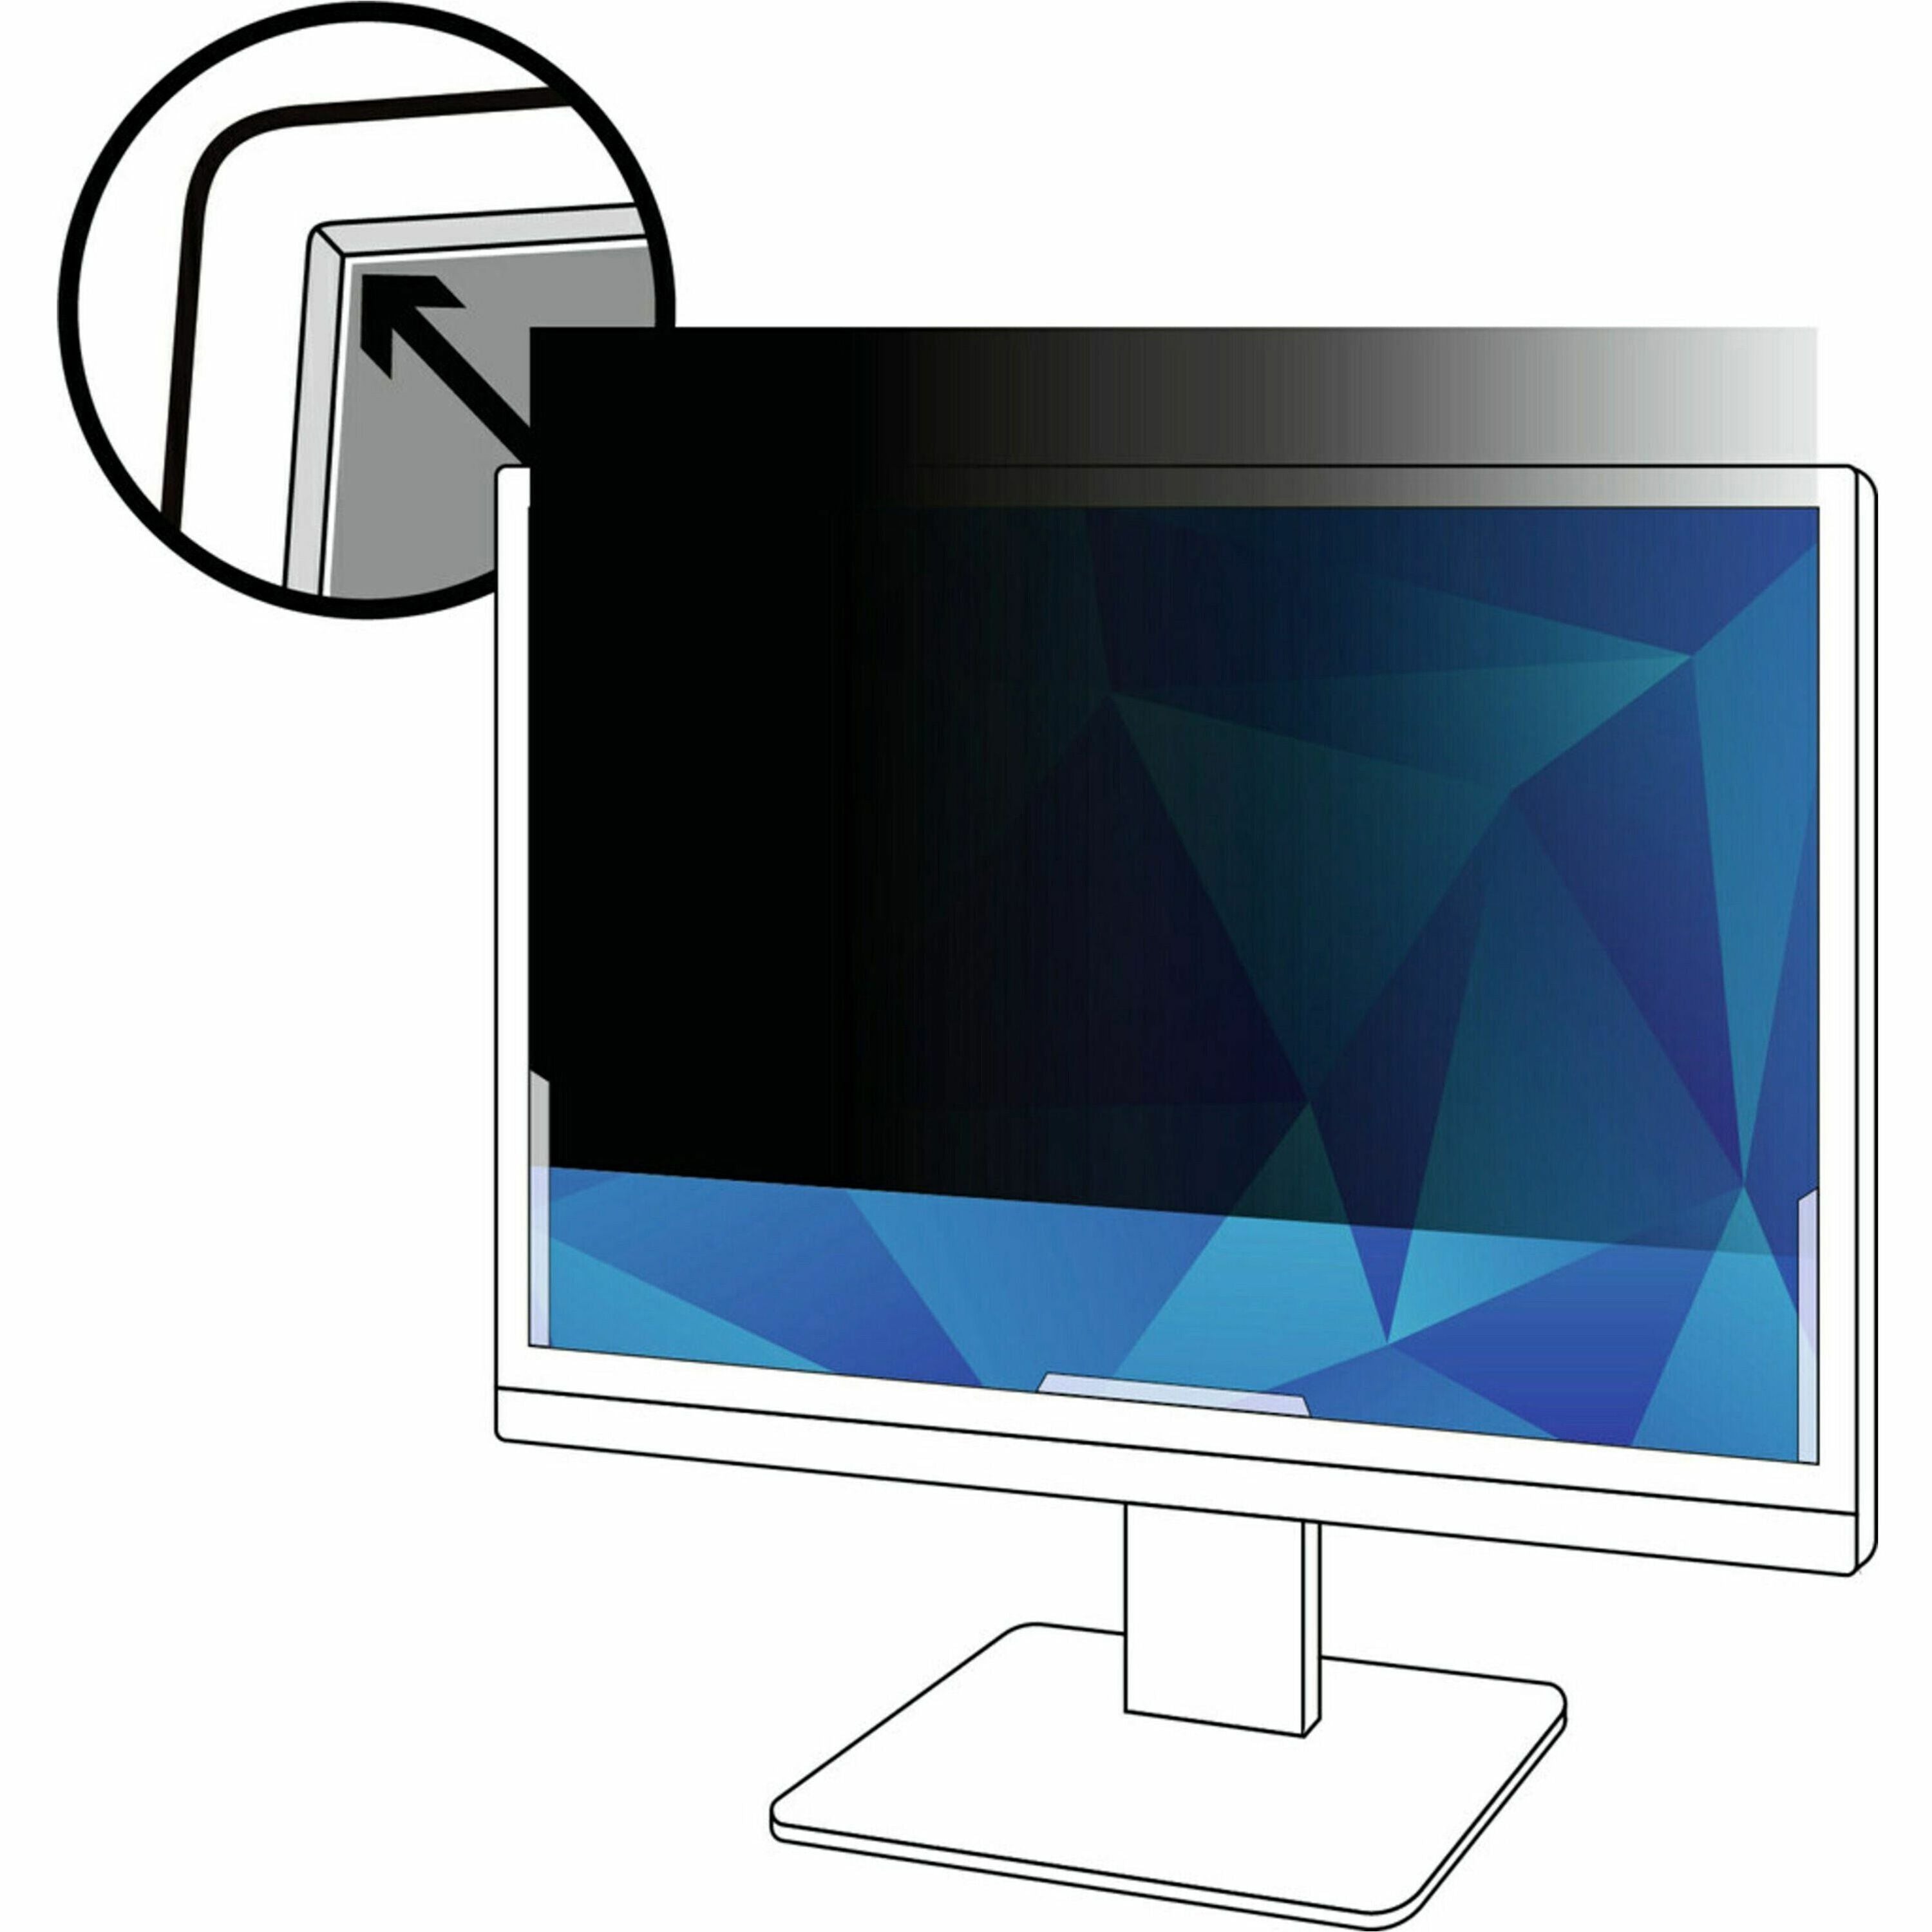 3m-privacy-filter-for-28in-monitor-169-pf280w9b-for-28-widescreen-lcd-monitor-169-scratch-resistant-fingerprint-resistant-dust-resistant-anti-glare_mmmpf280w9b - 1